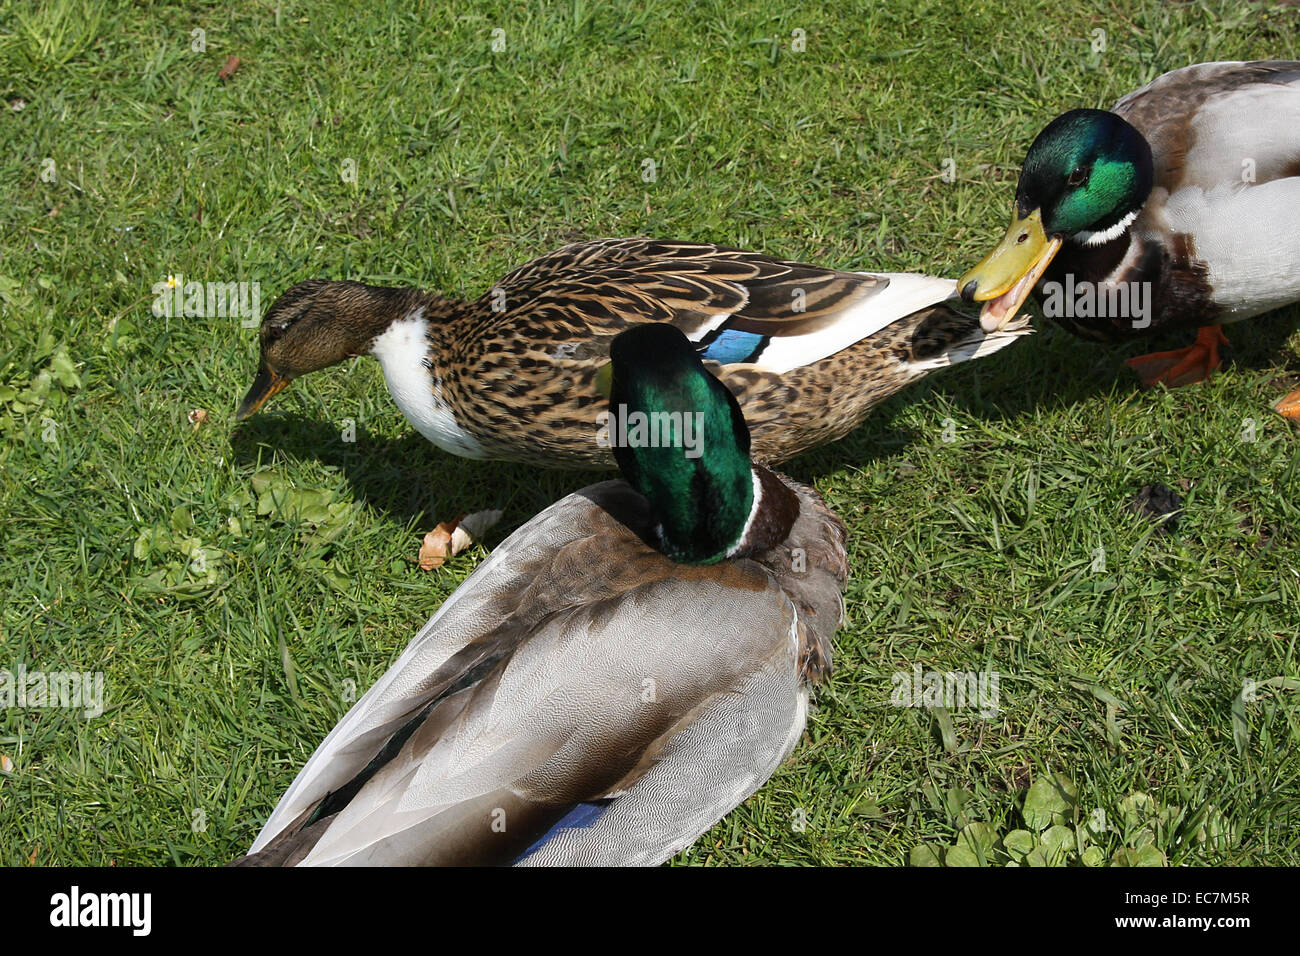 Male Mallard in front and at right. The female duck behnd in centre (Anas platyrhynchos). The mallard is the most famous duck and the root form of the domestic duck. Photo: Klaus Nowottnick Date: April 23, 2010 Stock Photo